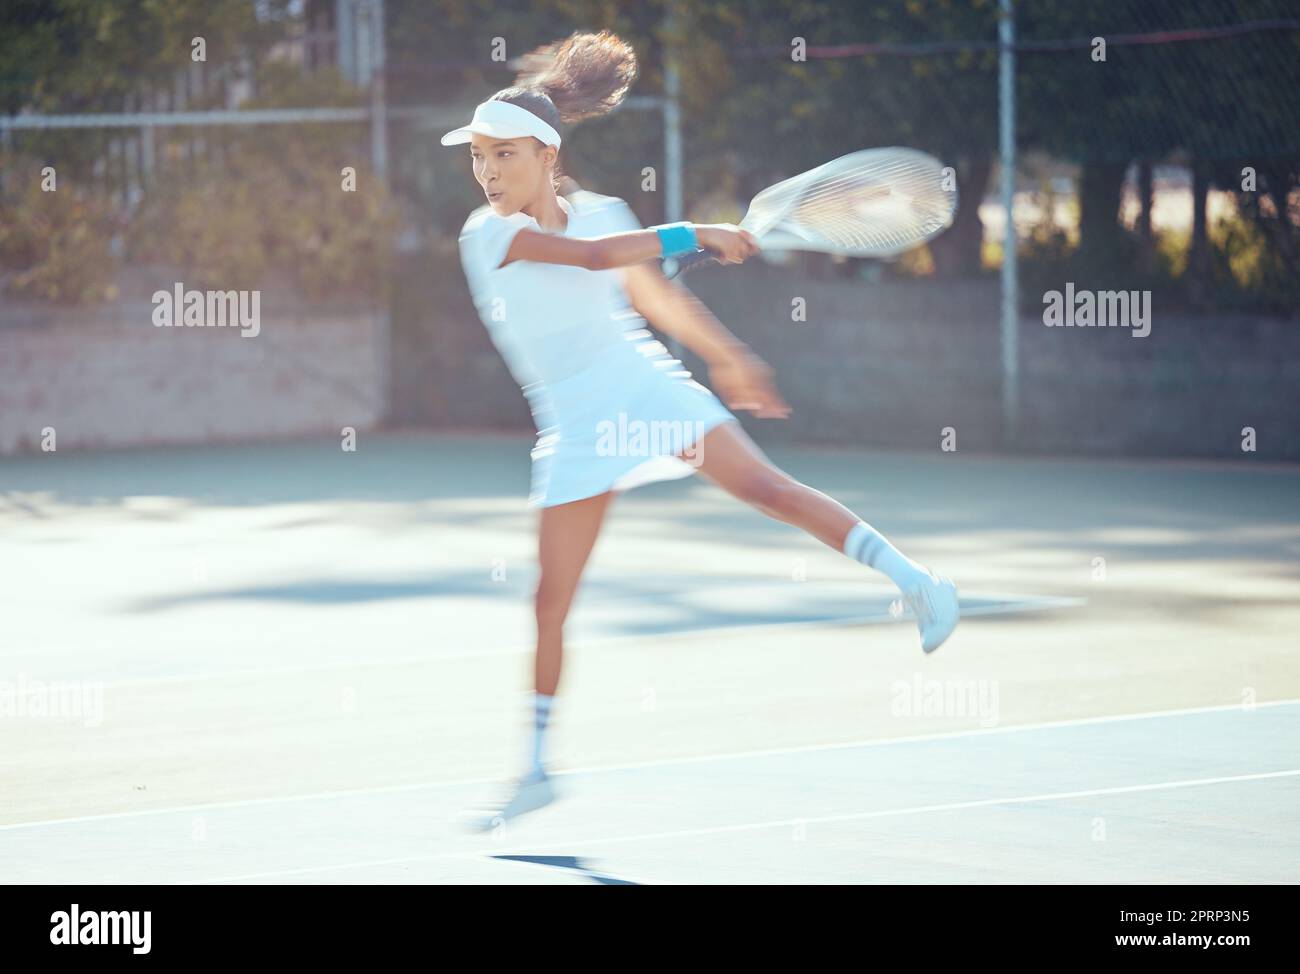 Tennis, action and active woman athlete playing sports, fitness and workout on game court. Training, motion and professional tennis player using racket to hit ball in competition match Stock Photo